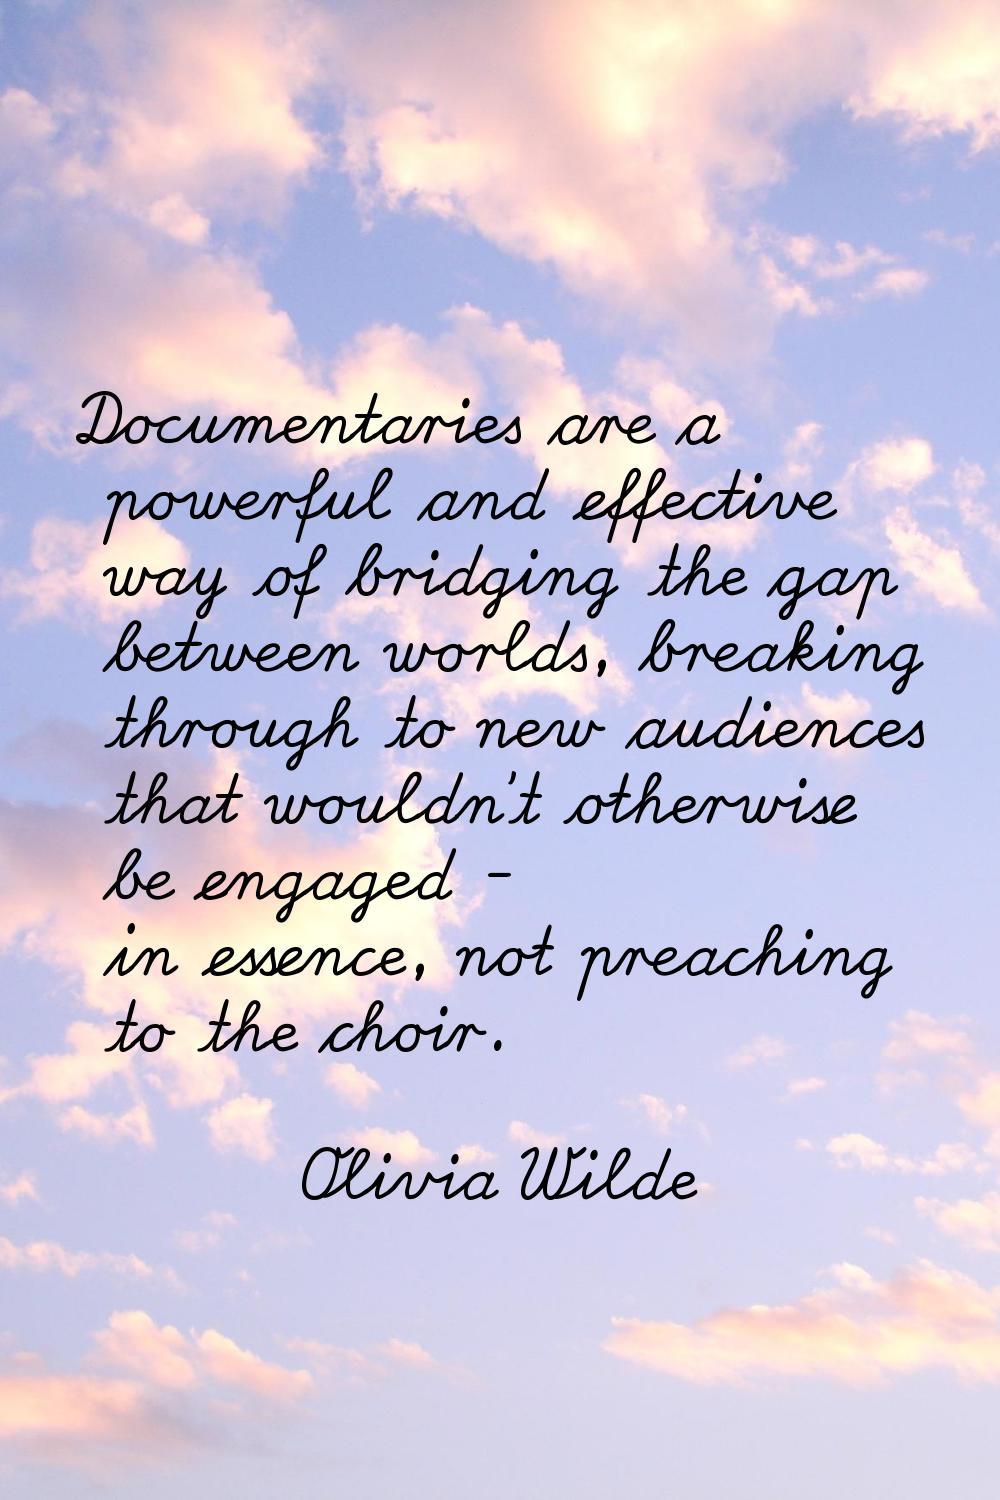 Documentaries are a powerful and effective way of bridging the gap between worlds, breaking through